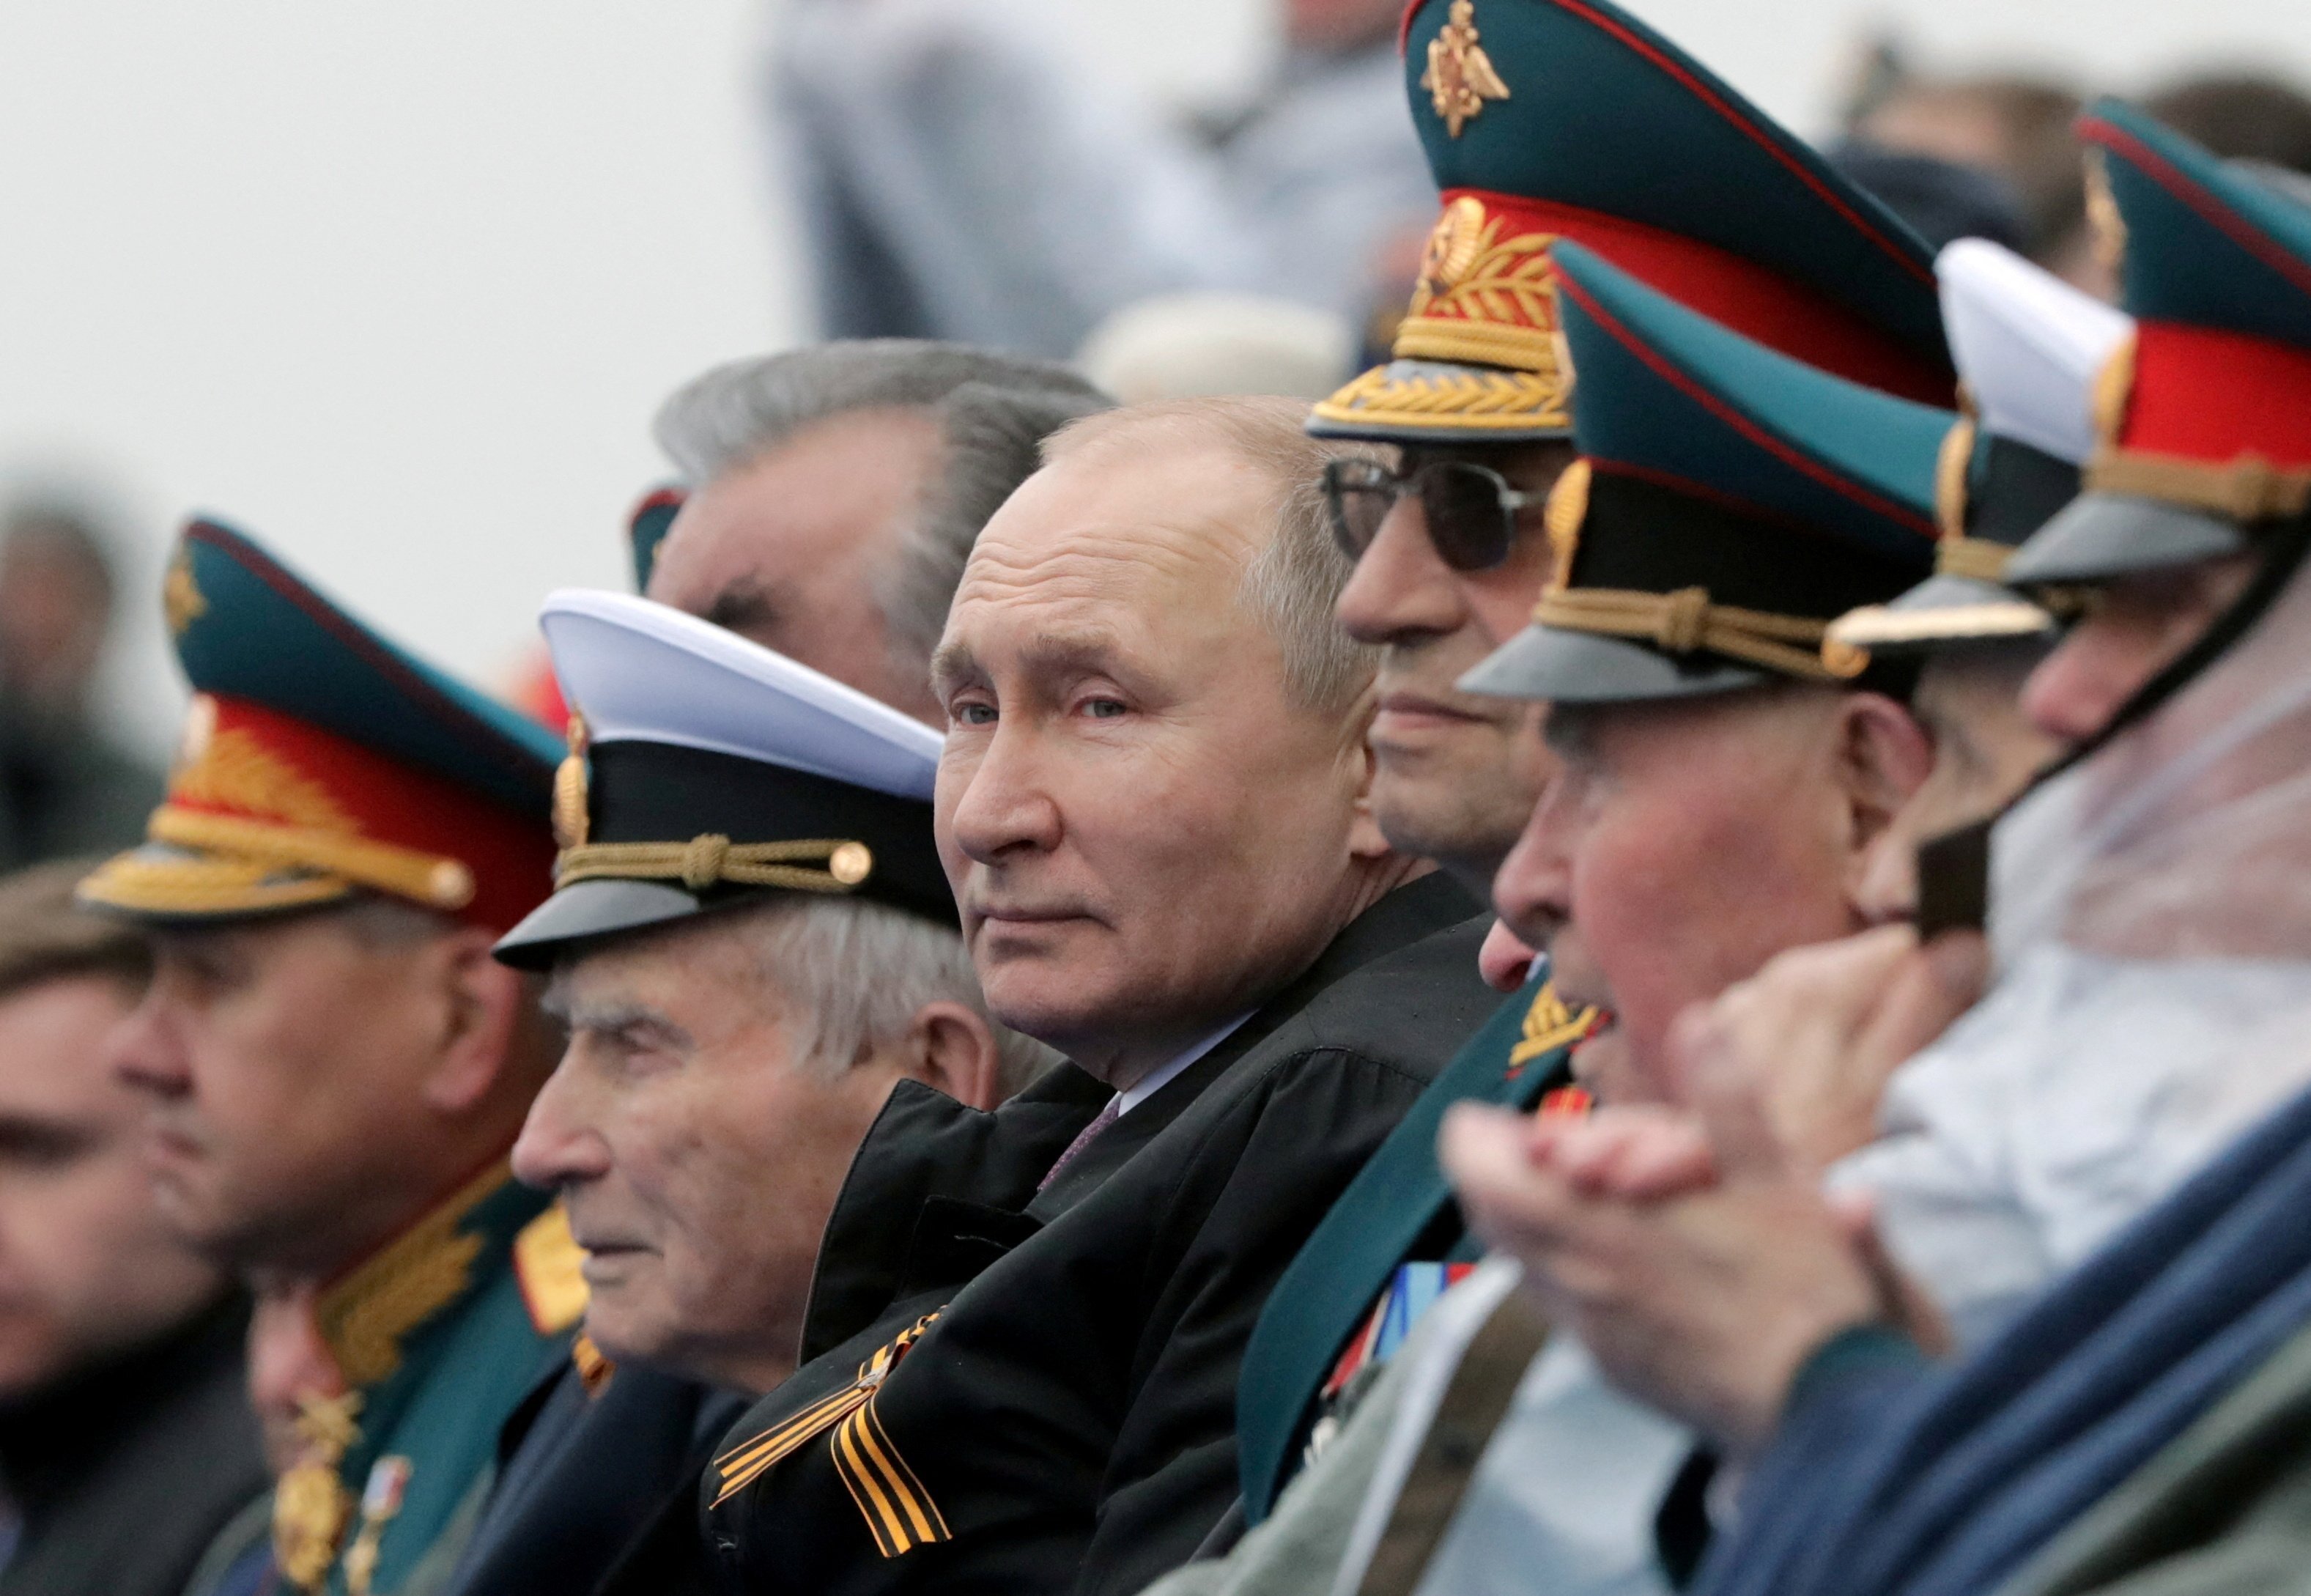 Russian President Vladimir Putin attends a military parade in Red Square in Moscow on May 9. Photo: Reuters